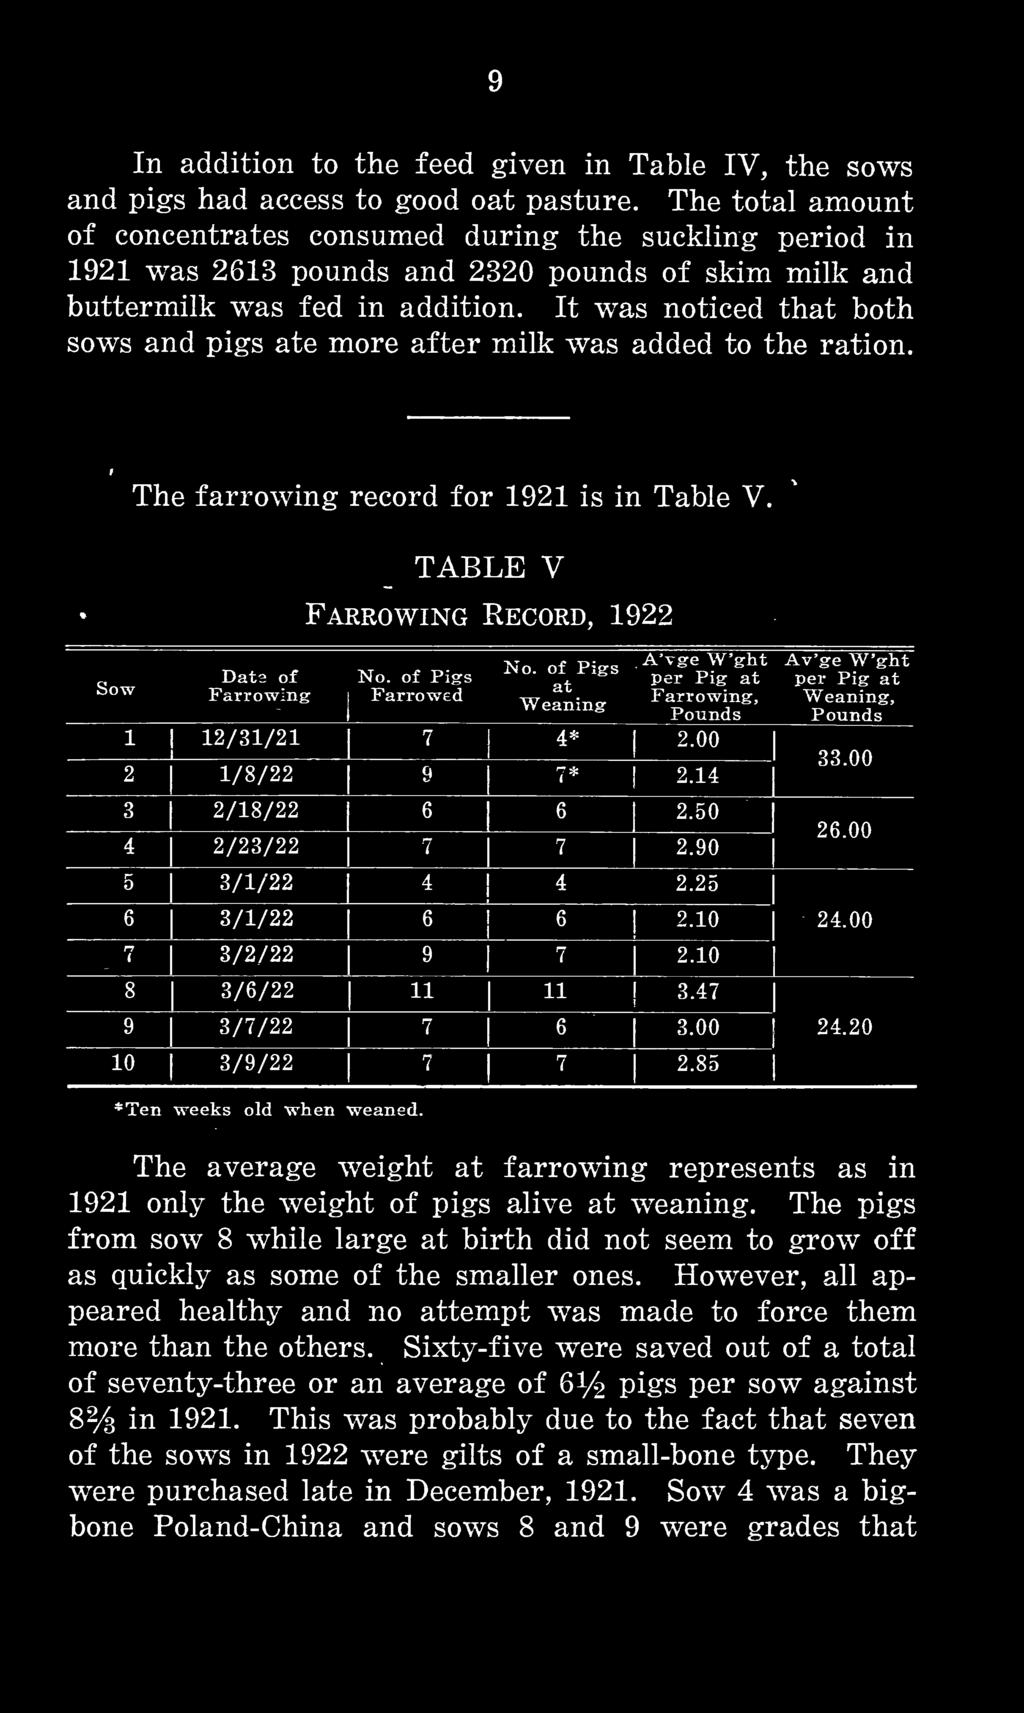 It was nticed that bth sws and pigs ate mre after milk was added t the ratin. The farrwing recrd fr 1921 is in Table V. Sw Dats f Fan-wing TABLE V Farrwing Recrd, 1922 N. f Pig-s Farrwed N.